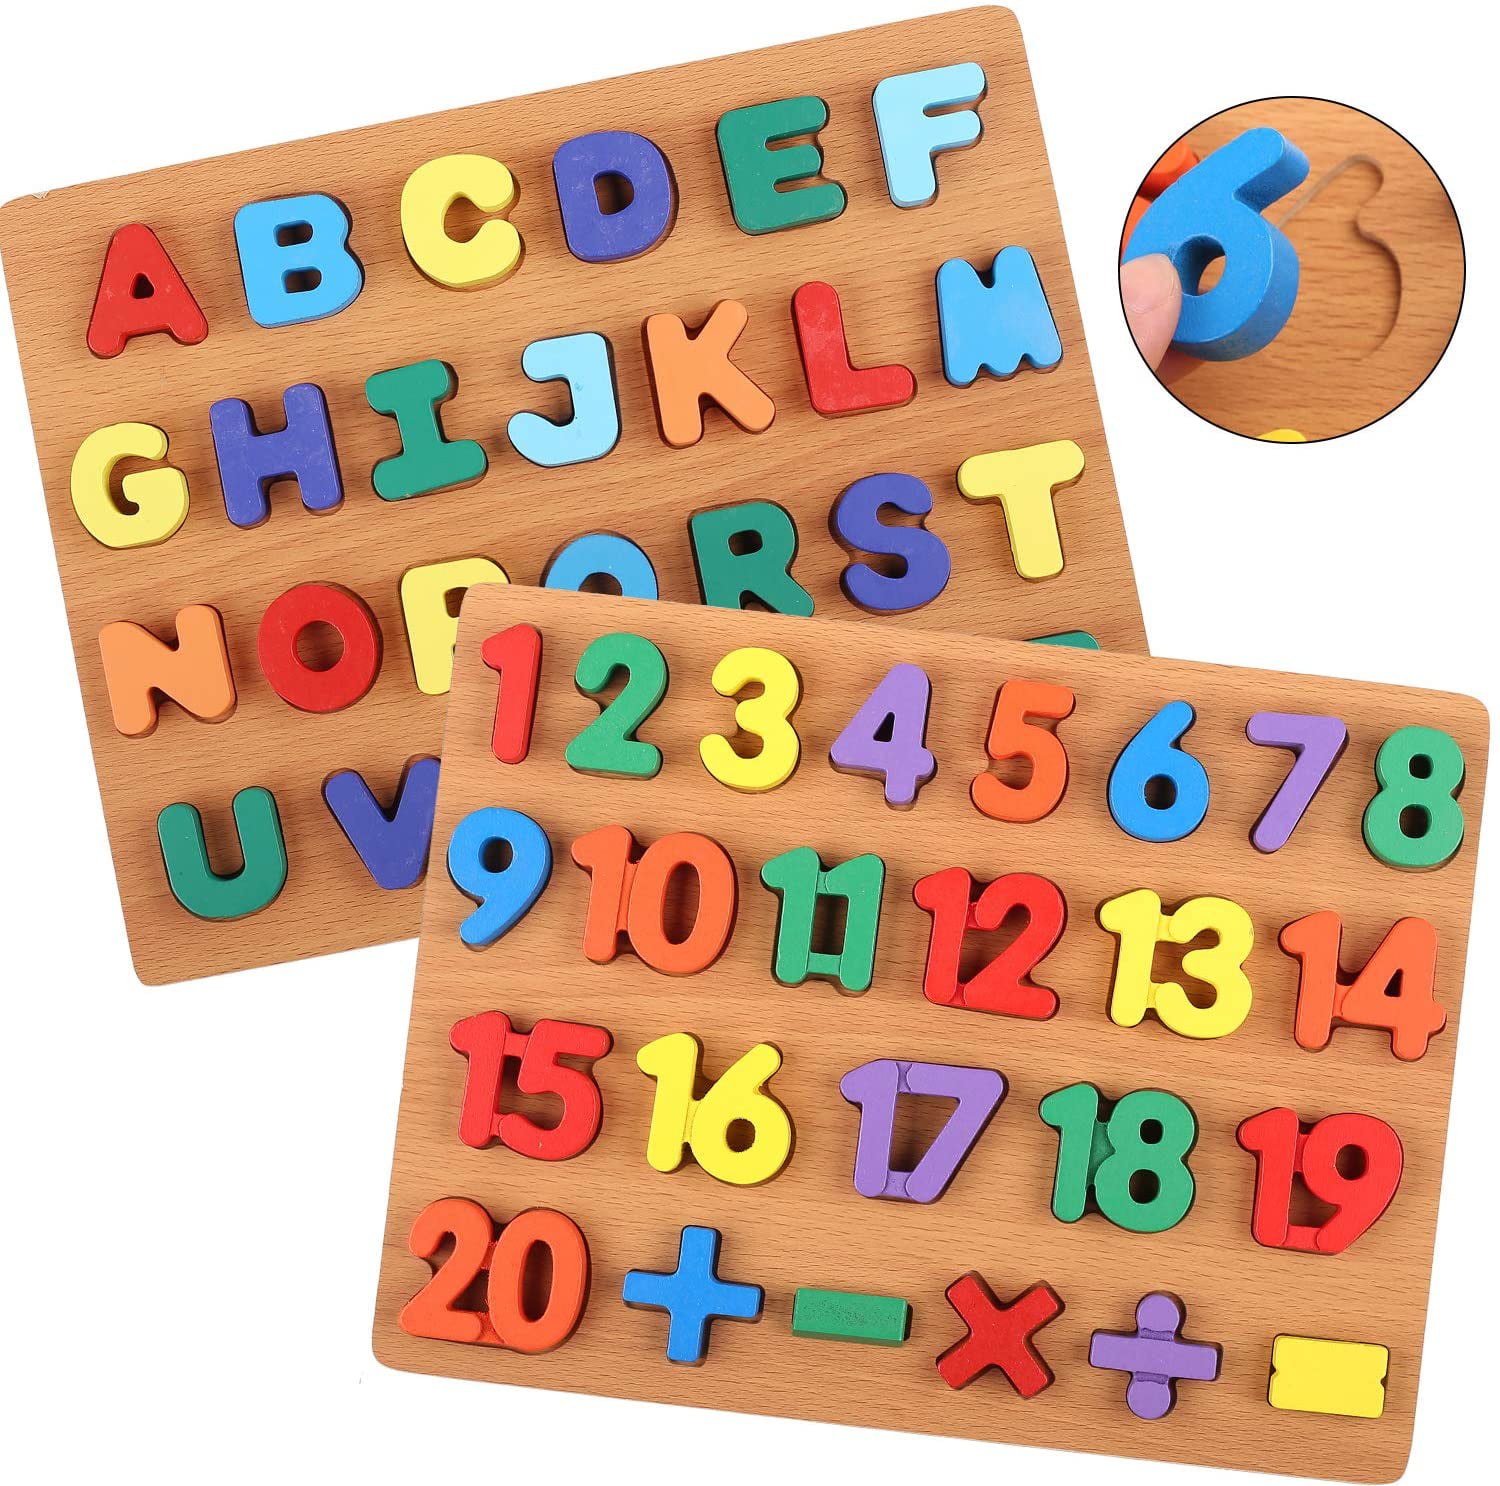 Fish Wooden Puzzle Alphabet Letter Block Preschool Kids Toddler Learning Toy 